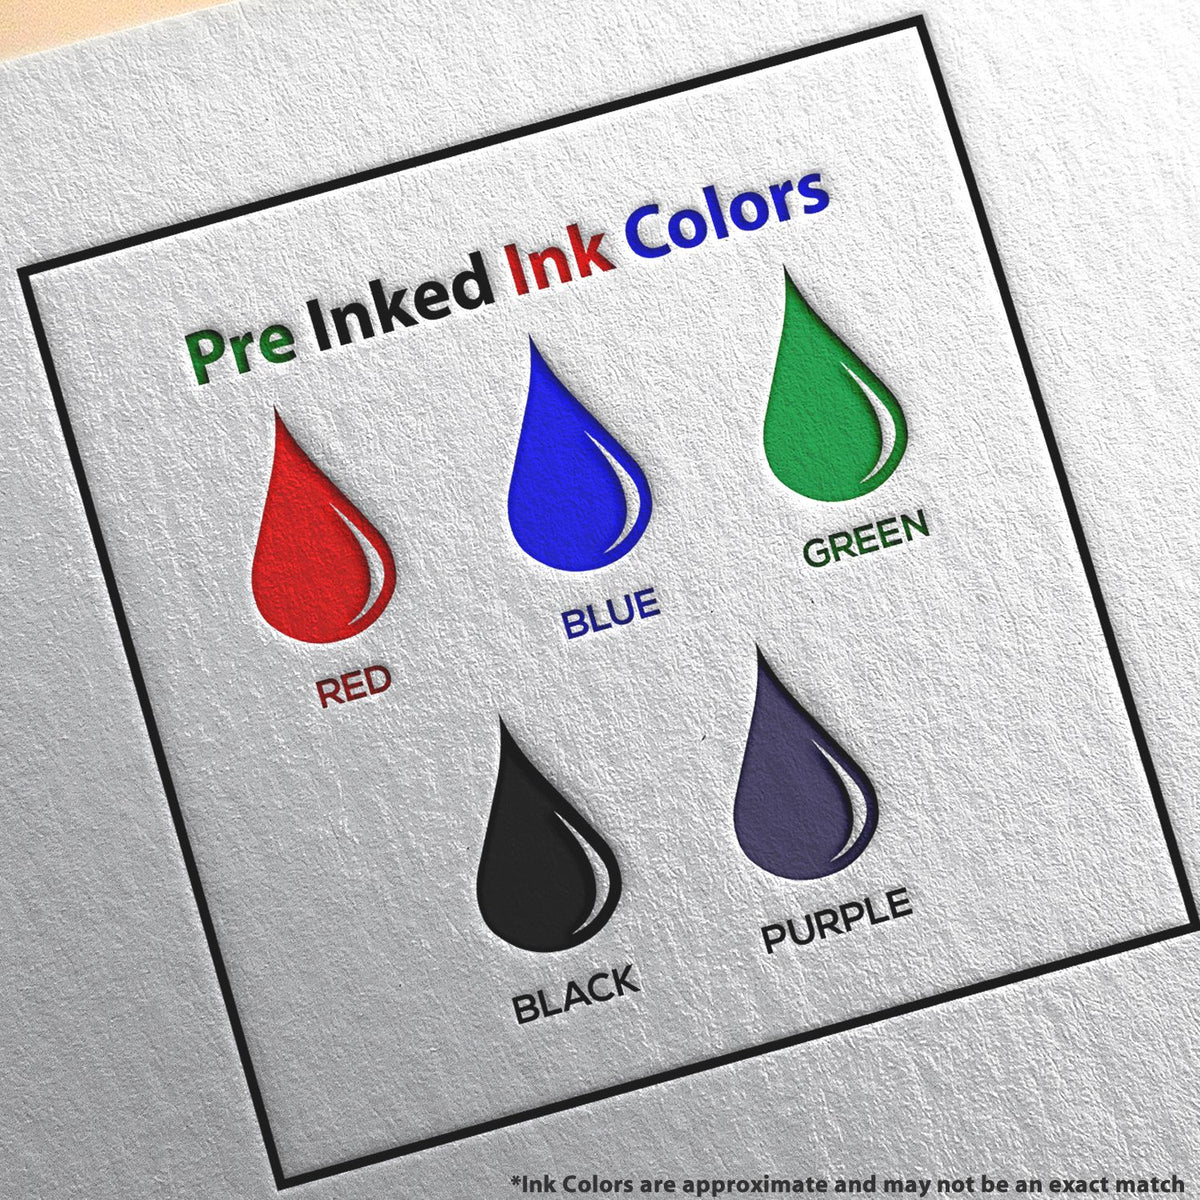 A picture showing the different ink colors or hues available for the Super Slim Iowa Notary Public Stamp product.